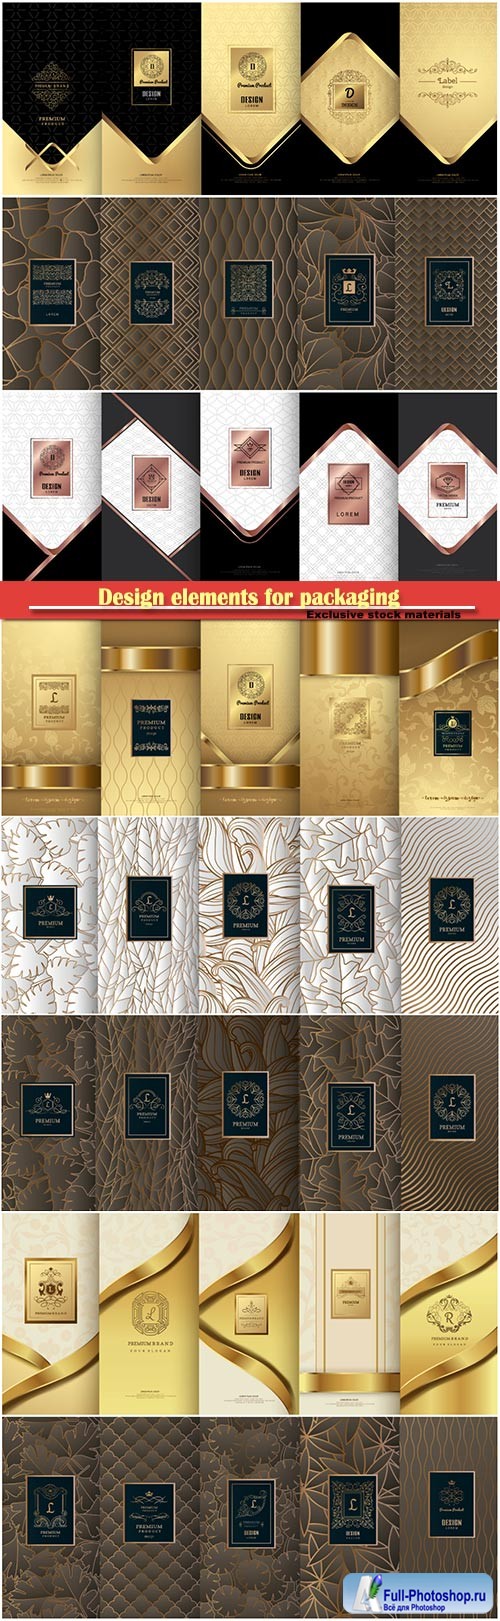 Design elements for packaging, design of luxury products for perfume